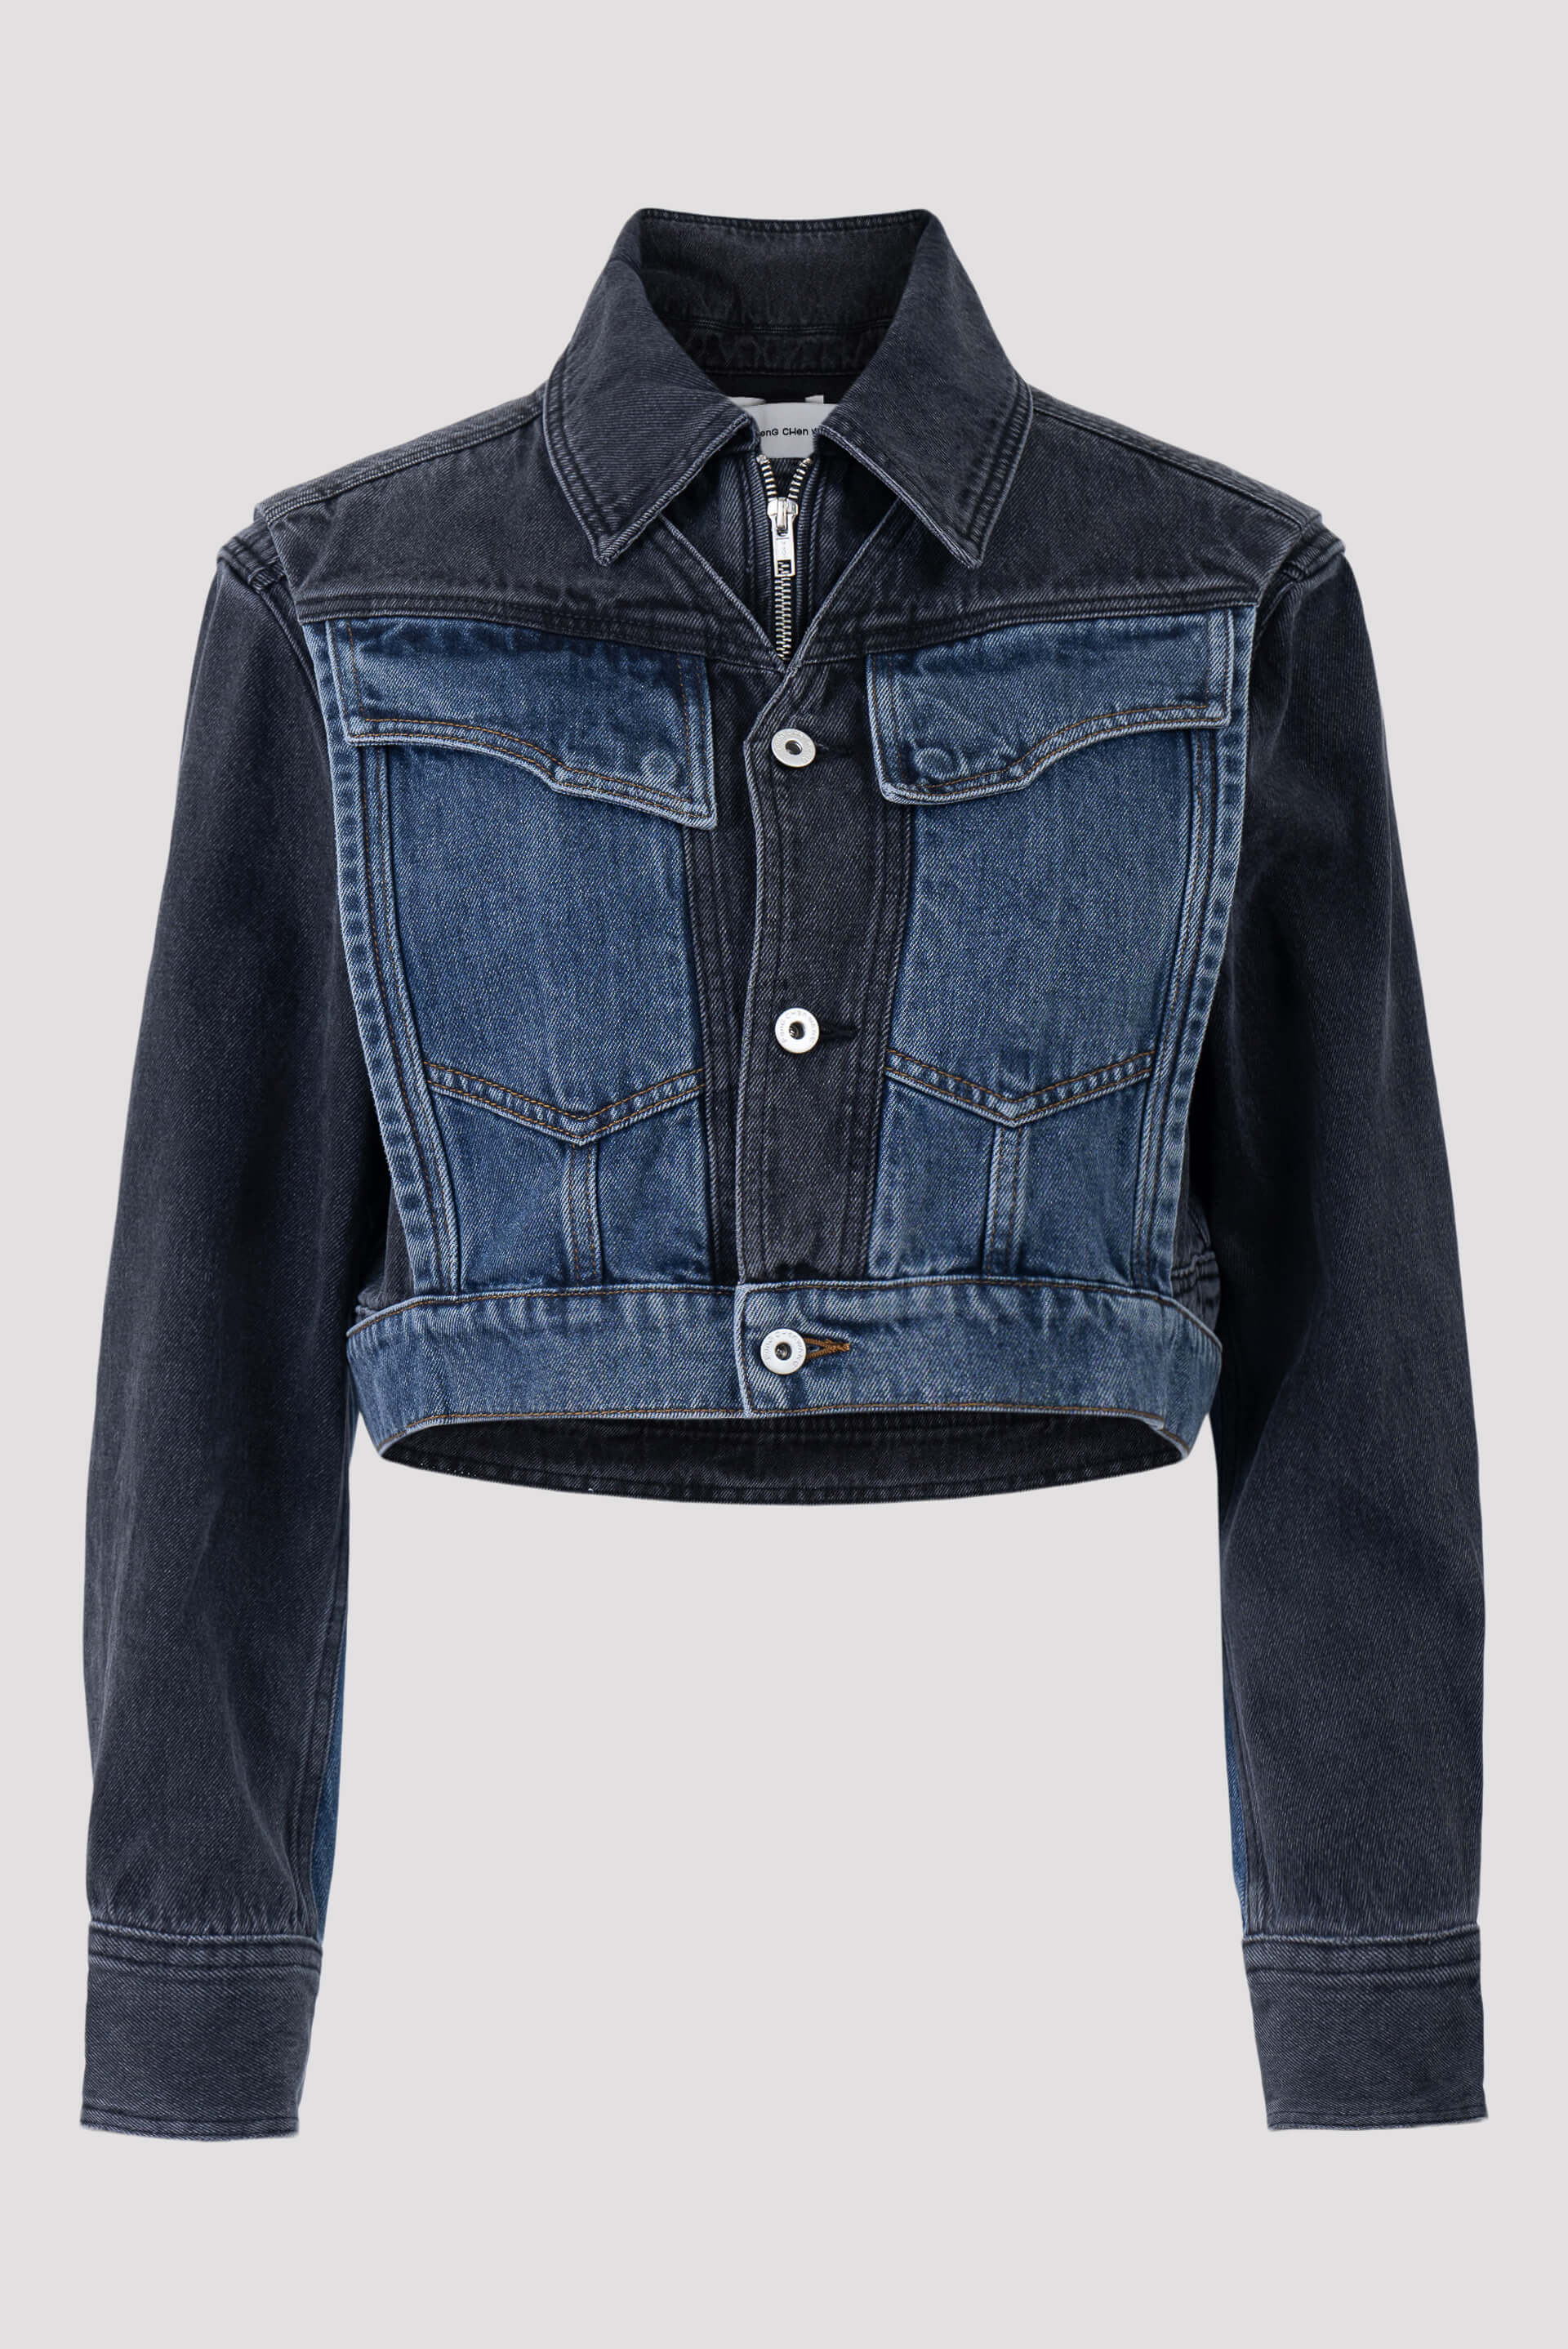 Feng Chen Wang 2 In 1 Panel Denim Jacket - Fabric of Society